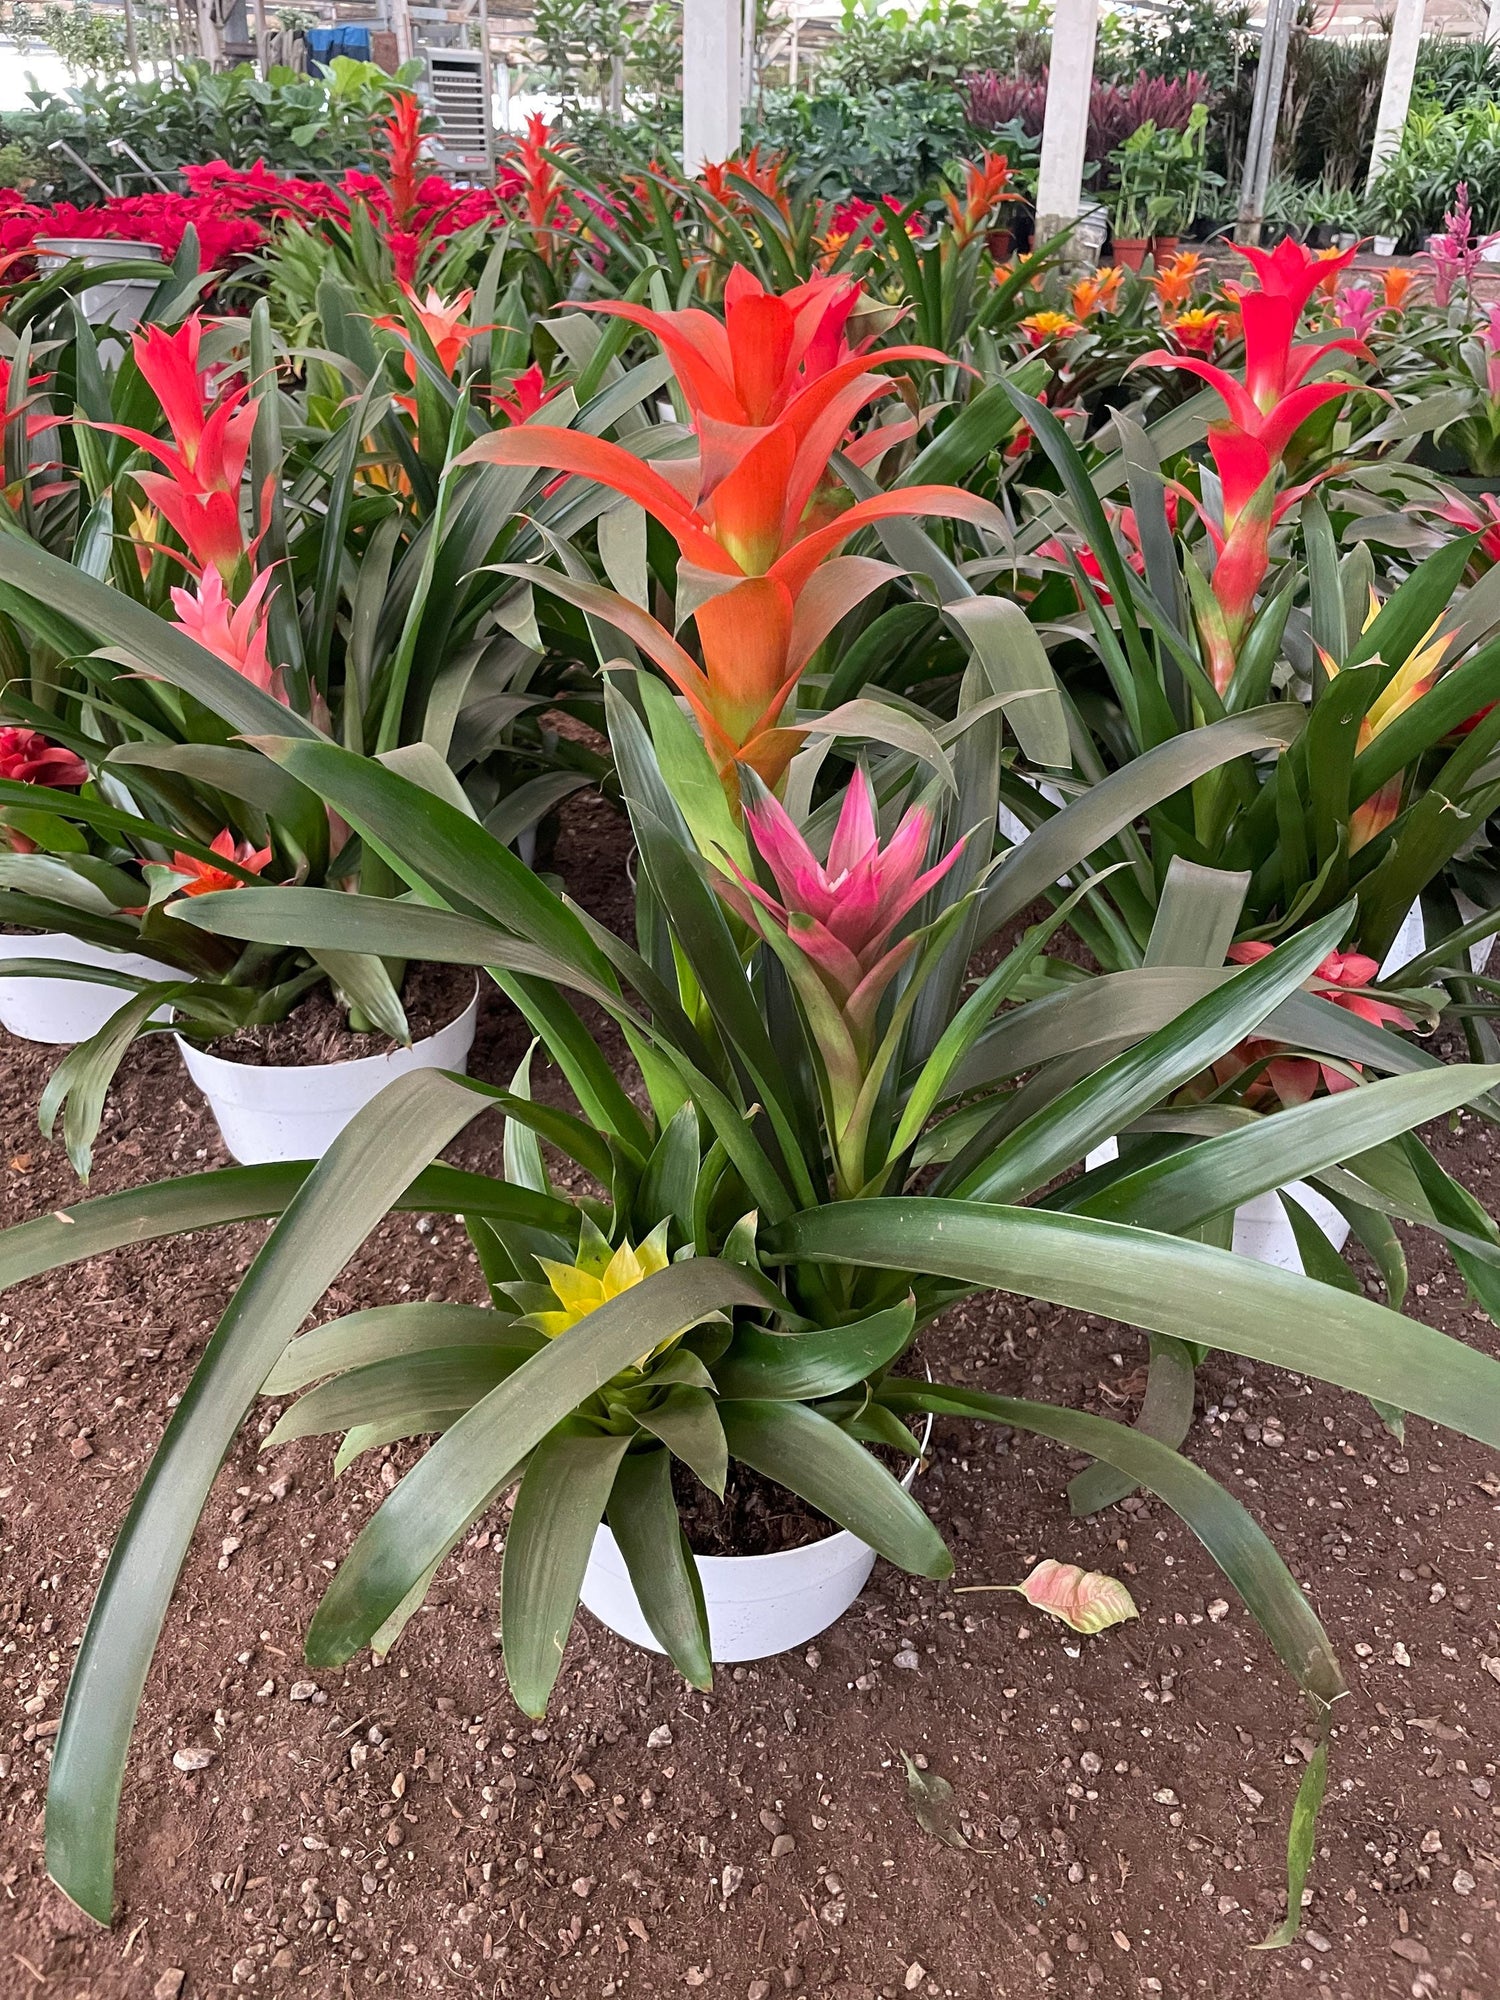 XXL- Multi colored Bromeliad planter  - easy care - brightens any dull location - just water the cups can be soilless- great gift!